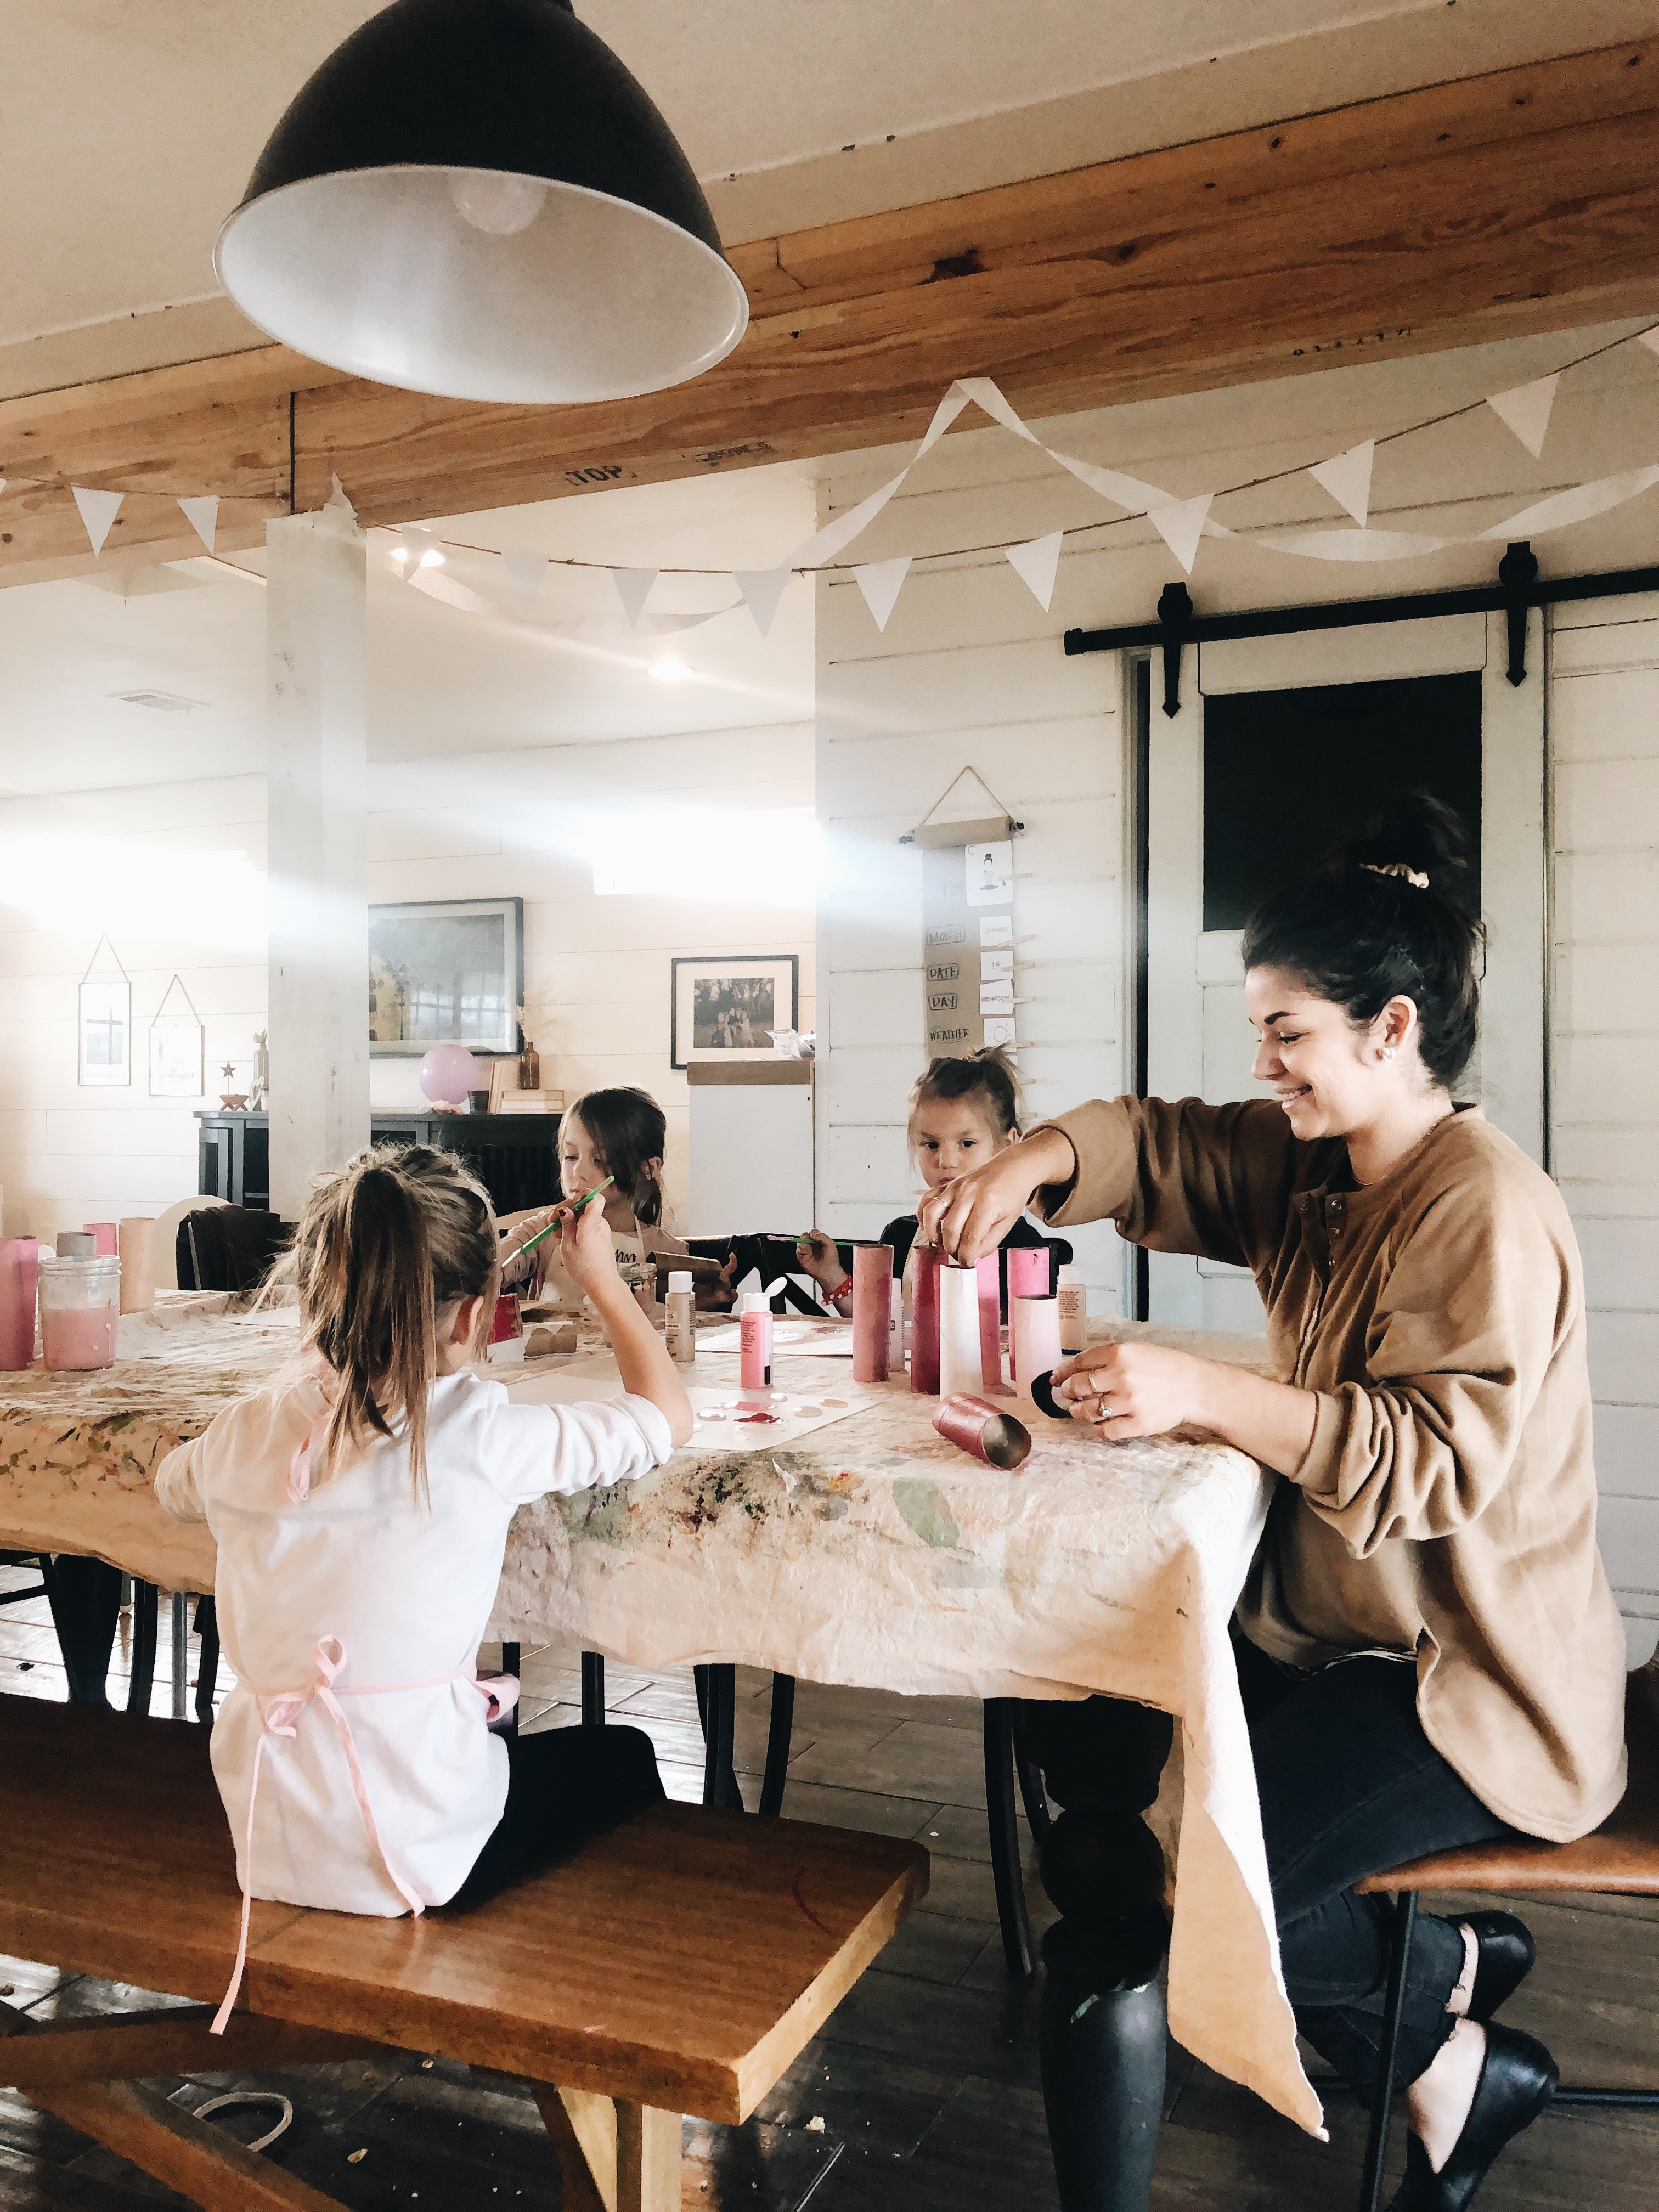 mom and kids painting DIY valentines crafts at home dining room table